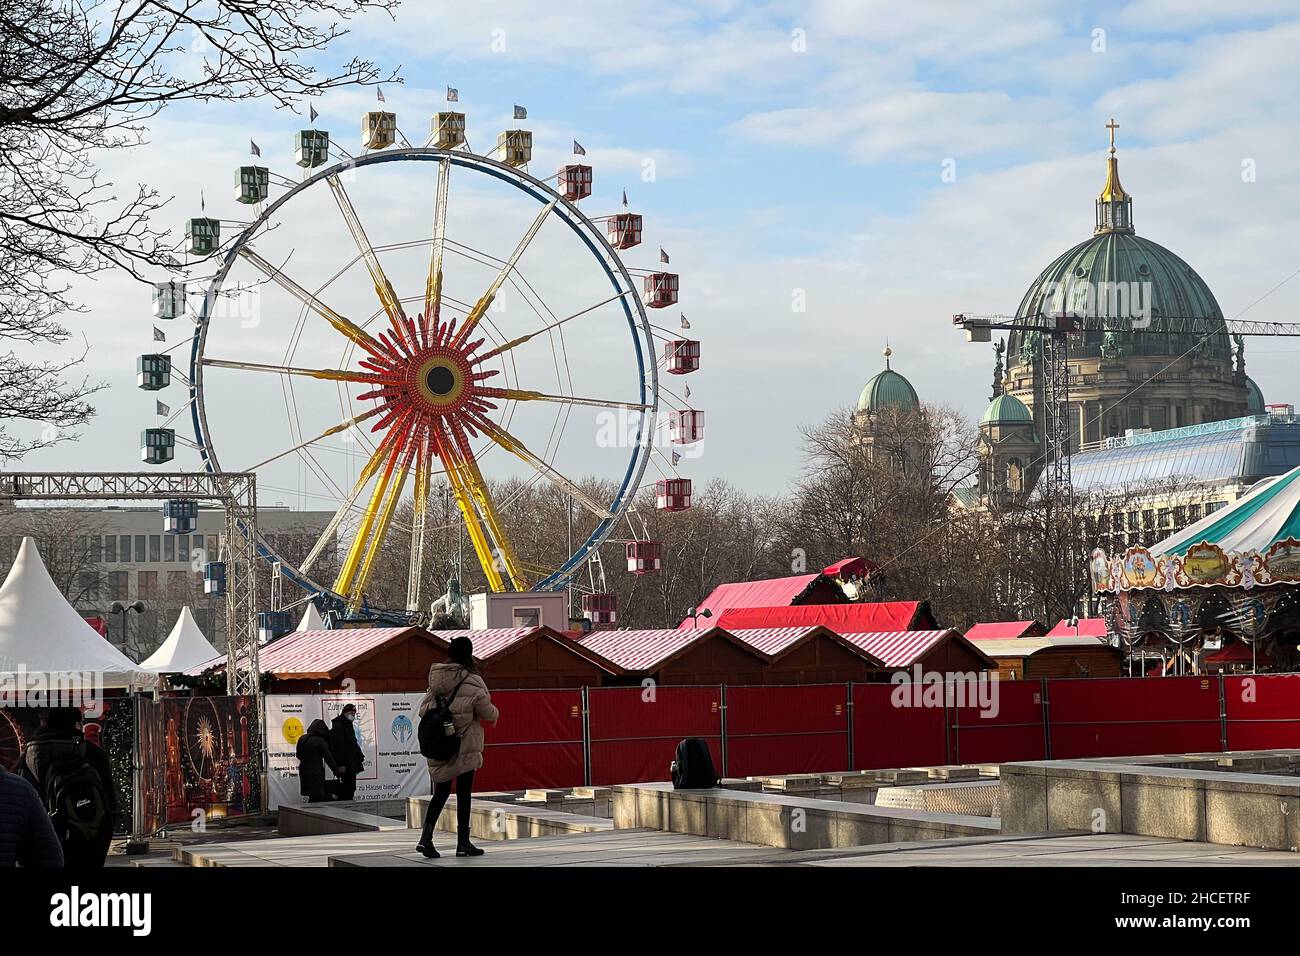 Ferris wheel spinning on a Christmas Market at Alexanderplatz in Berlin on a sunny winter day. Stock Photo